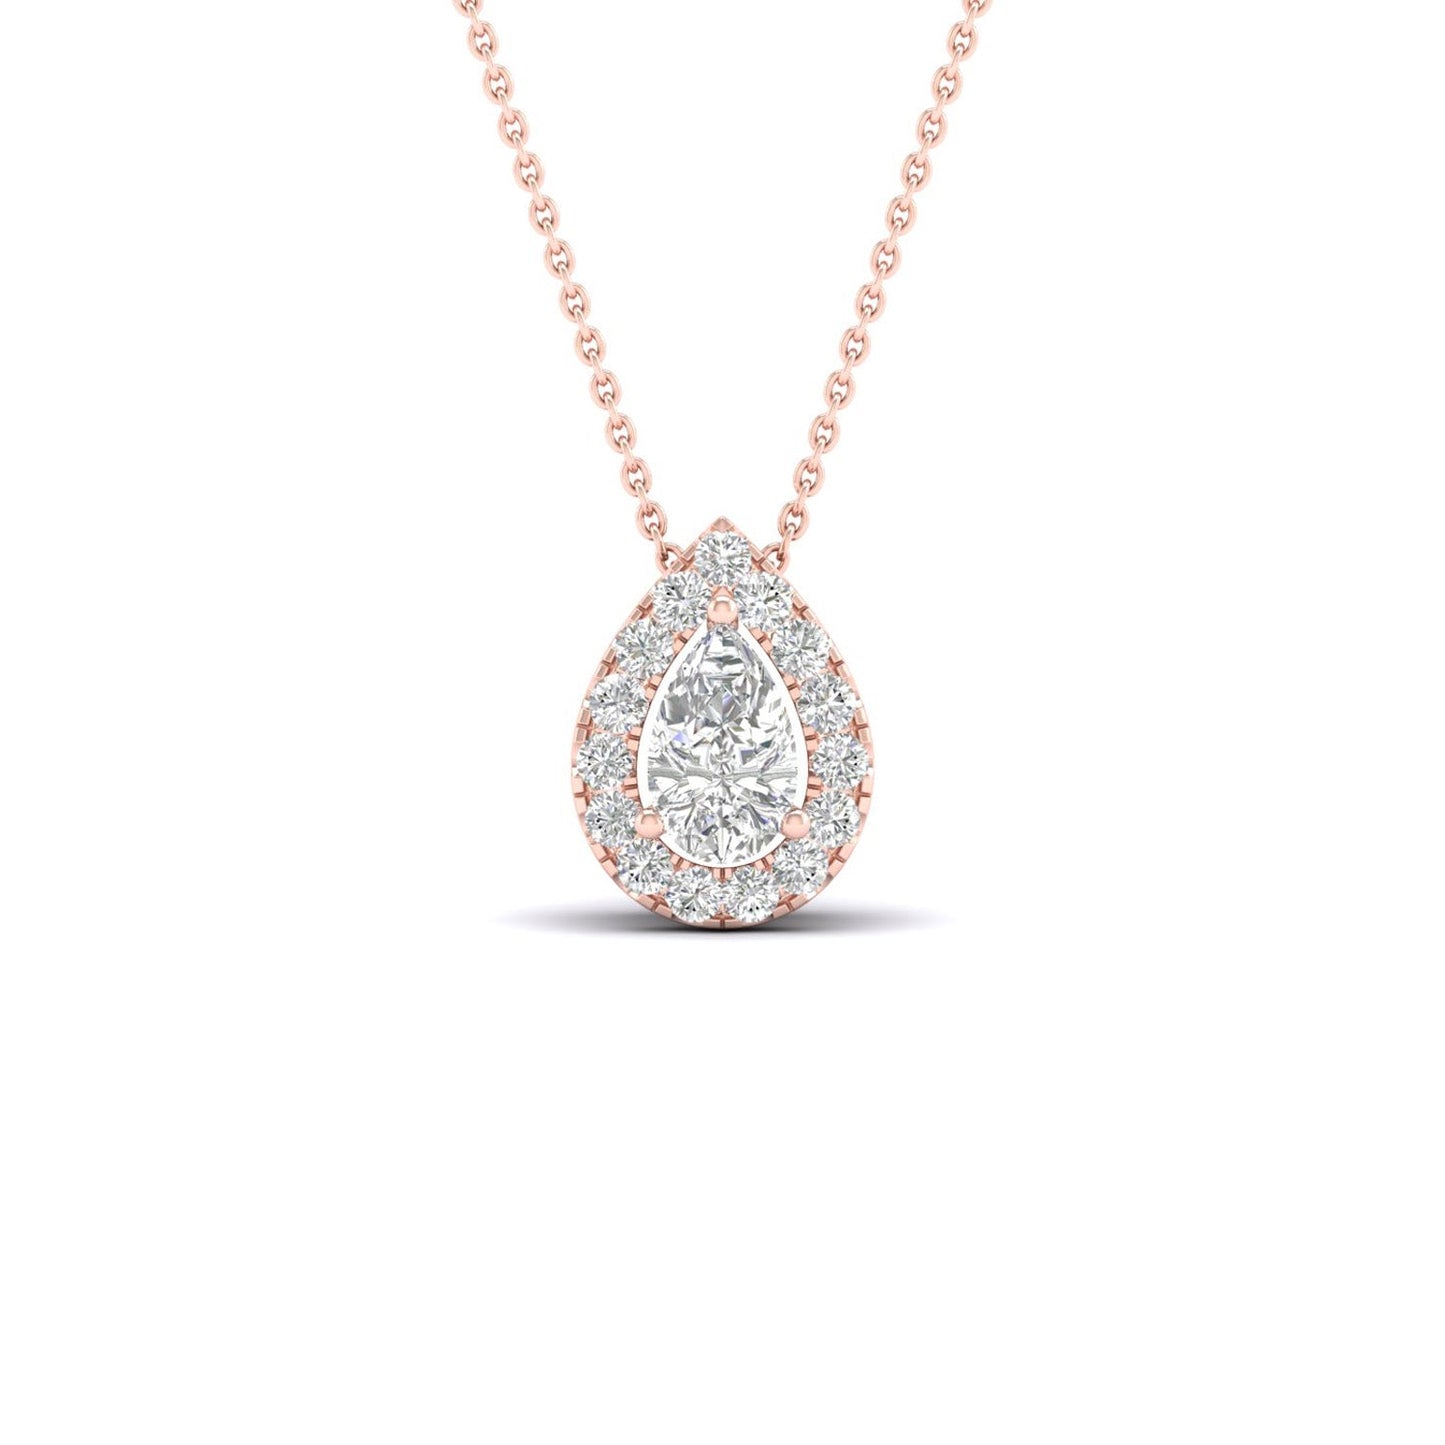 Petite Dewdrop Halo Necklace_Product angle_1/6 Ct. - 1